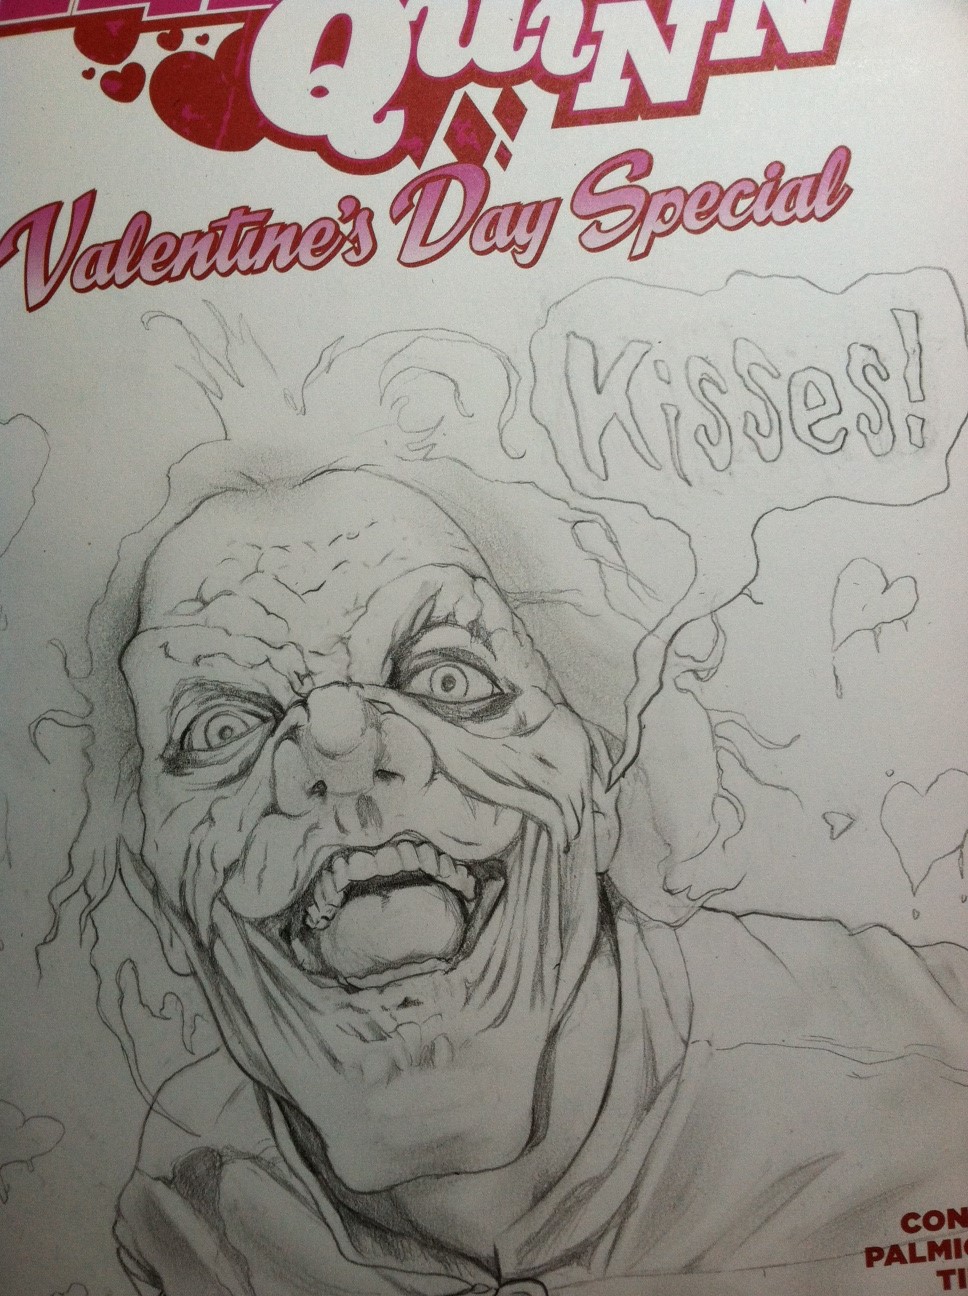 “Things are a bit sketchy as I draw a blank!” Drawing on blank comic book sketch covers for fun and profit.